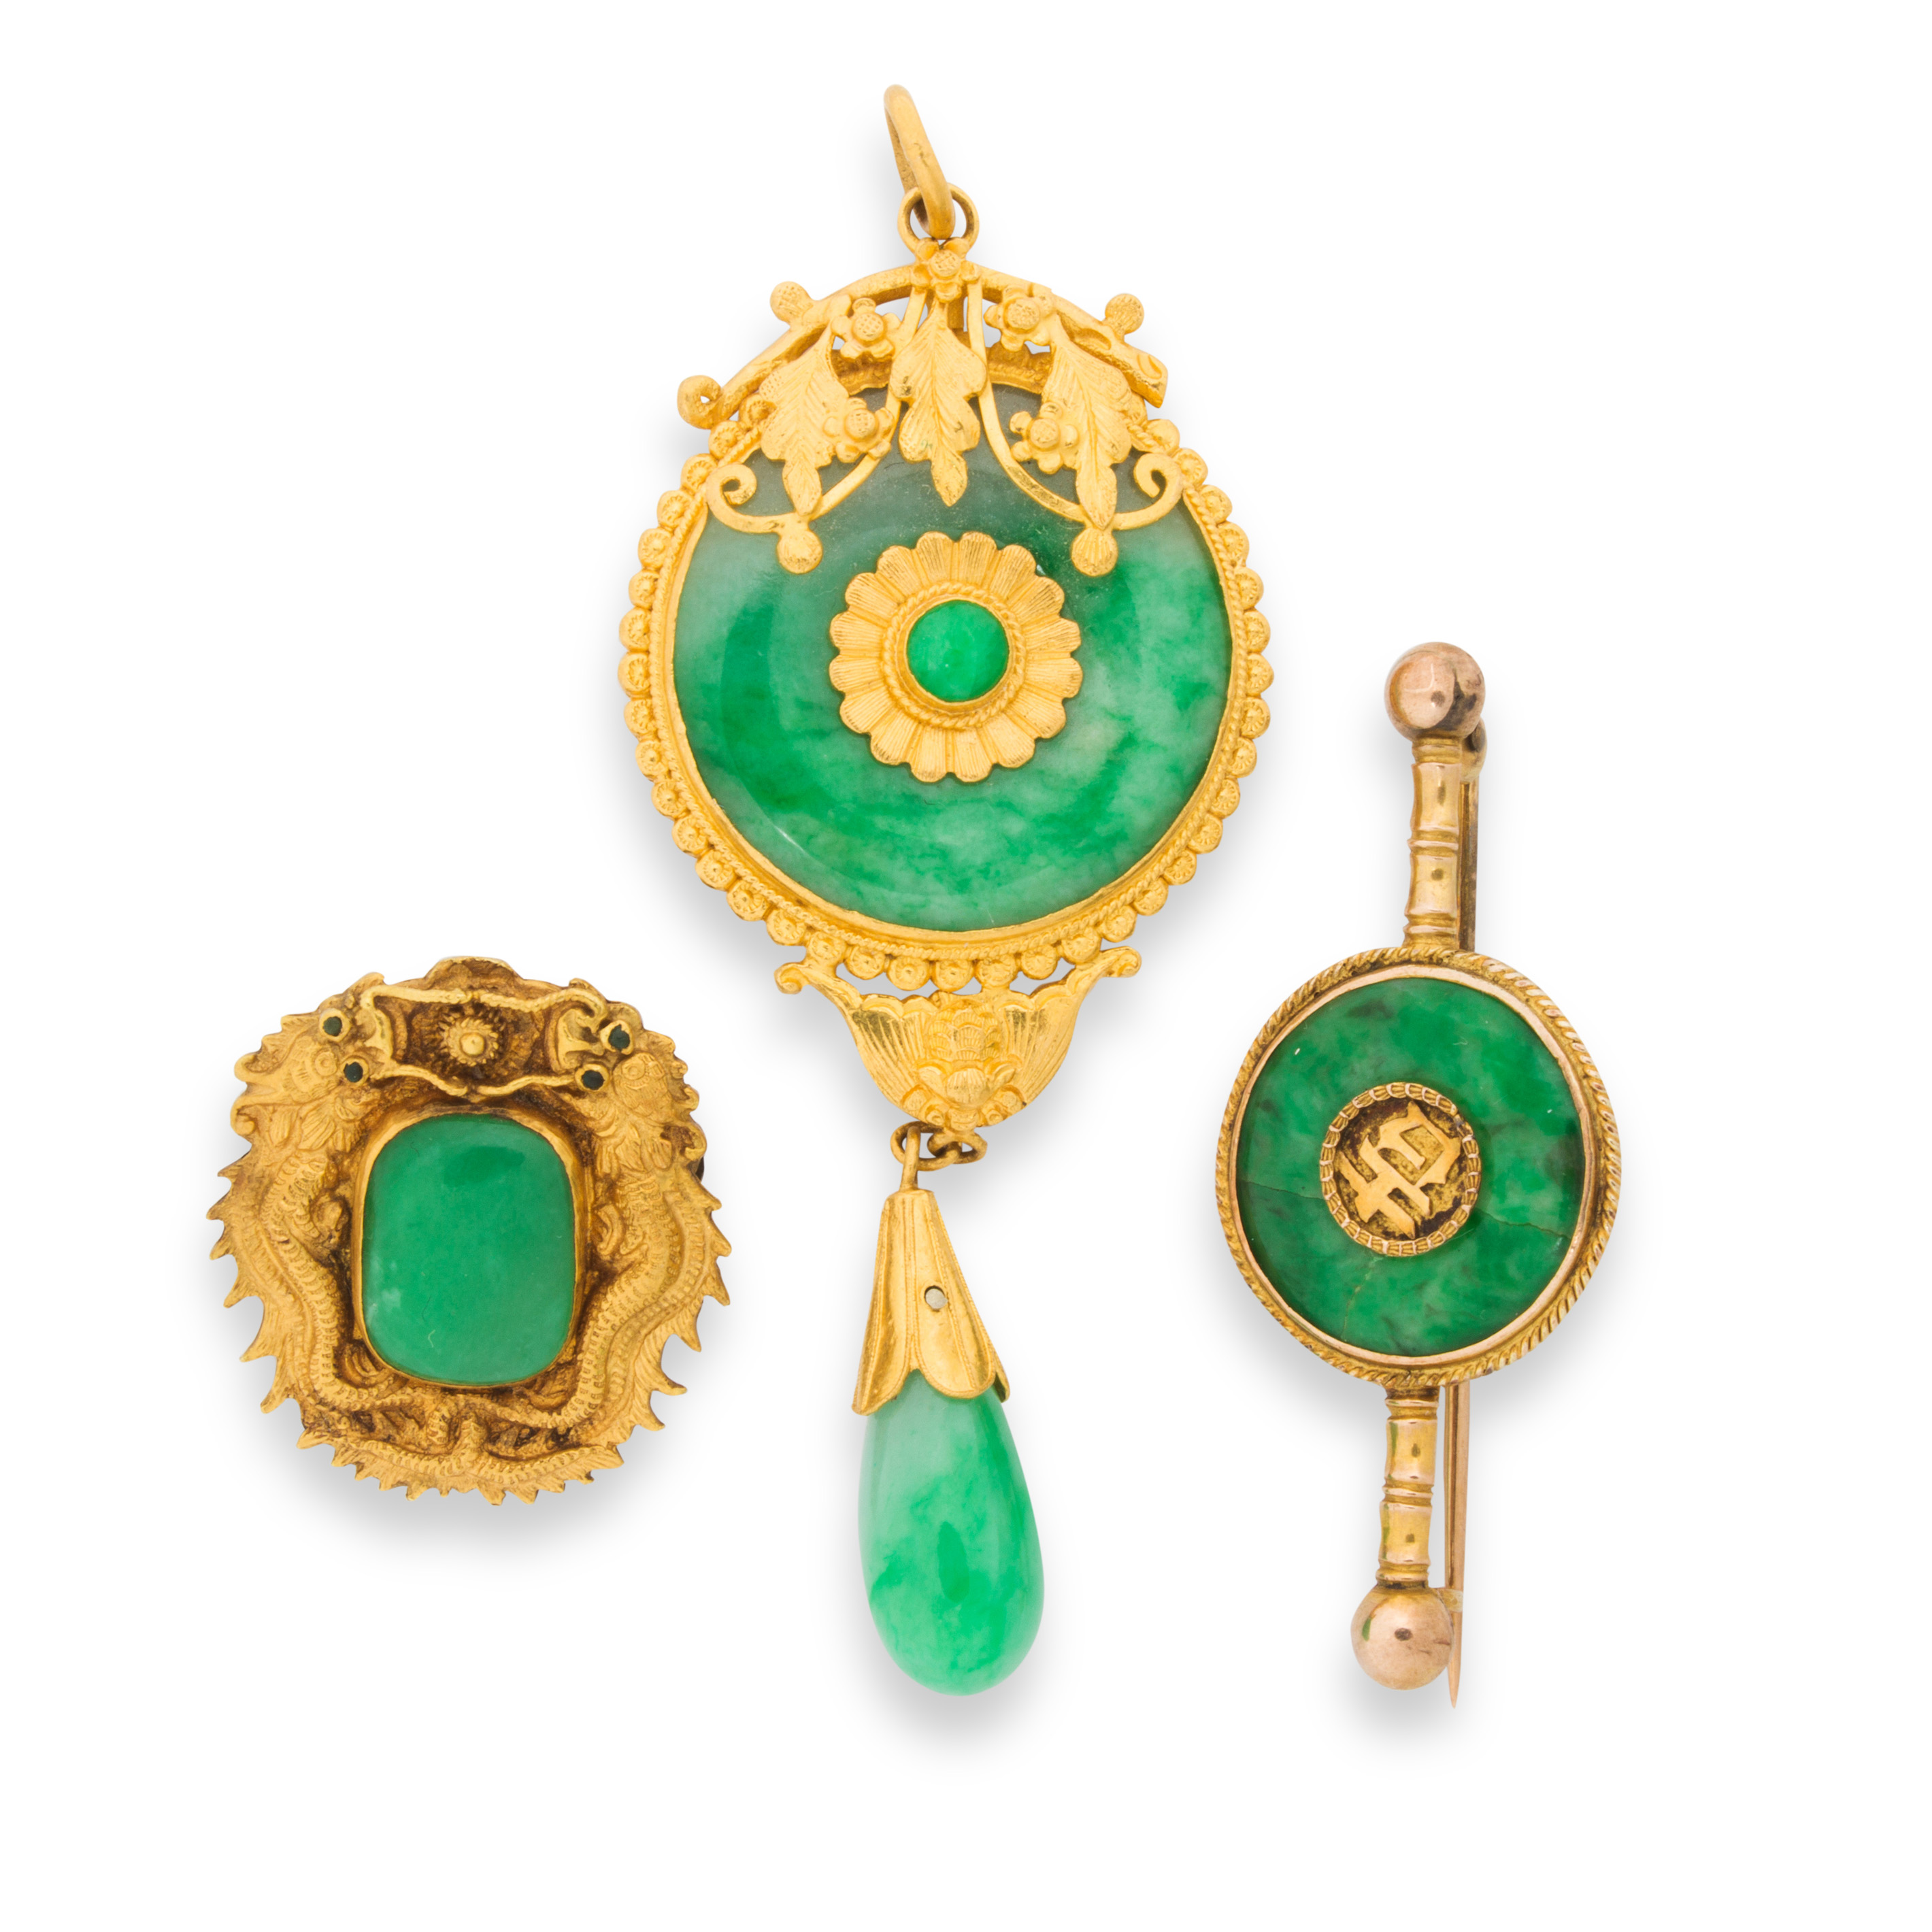 A GROUP OF JADE AND GOLD JEWELRY